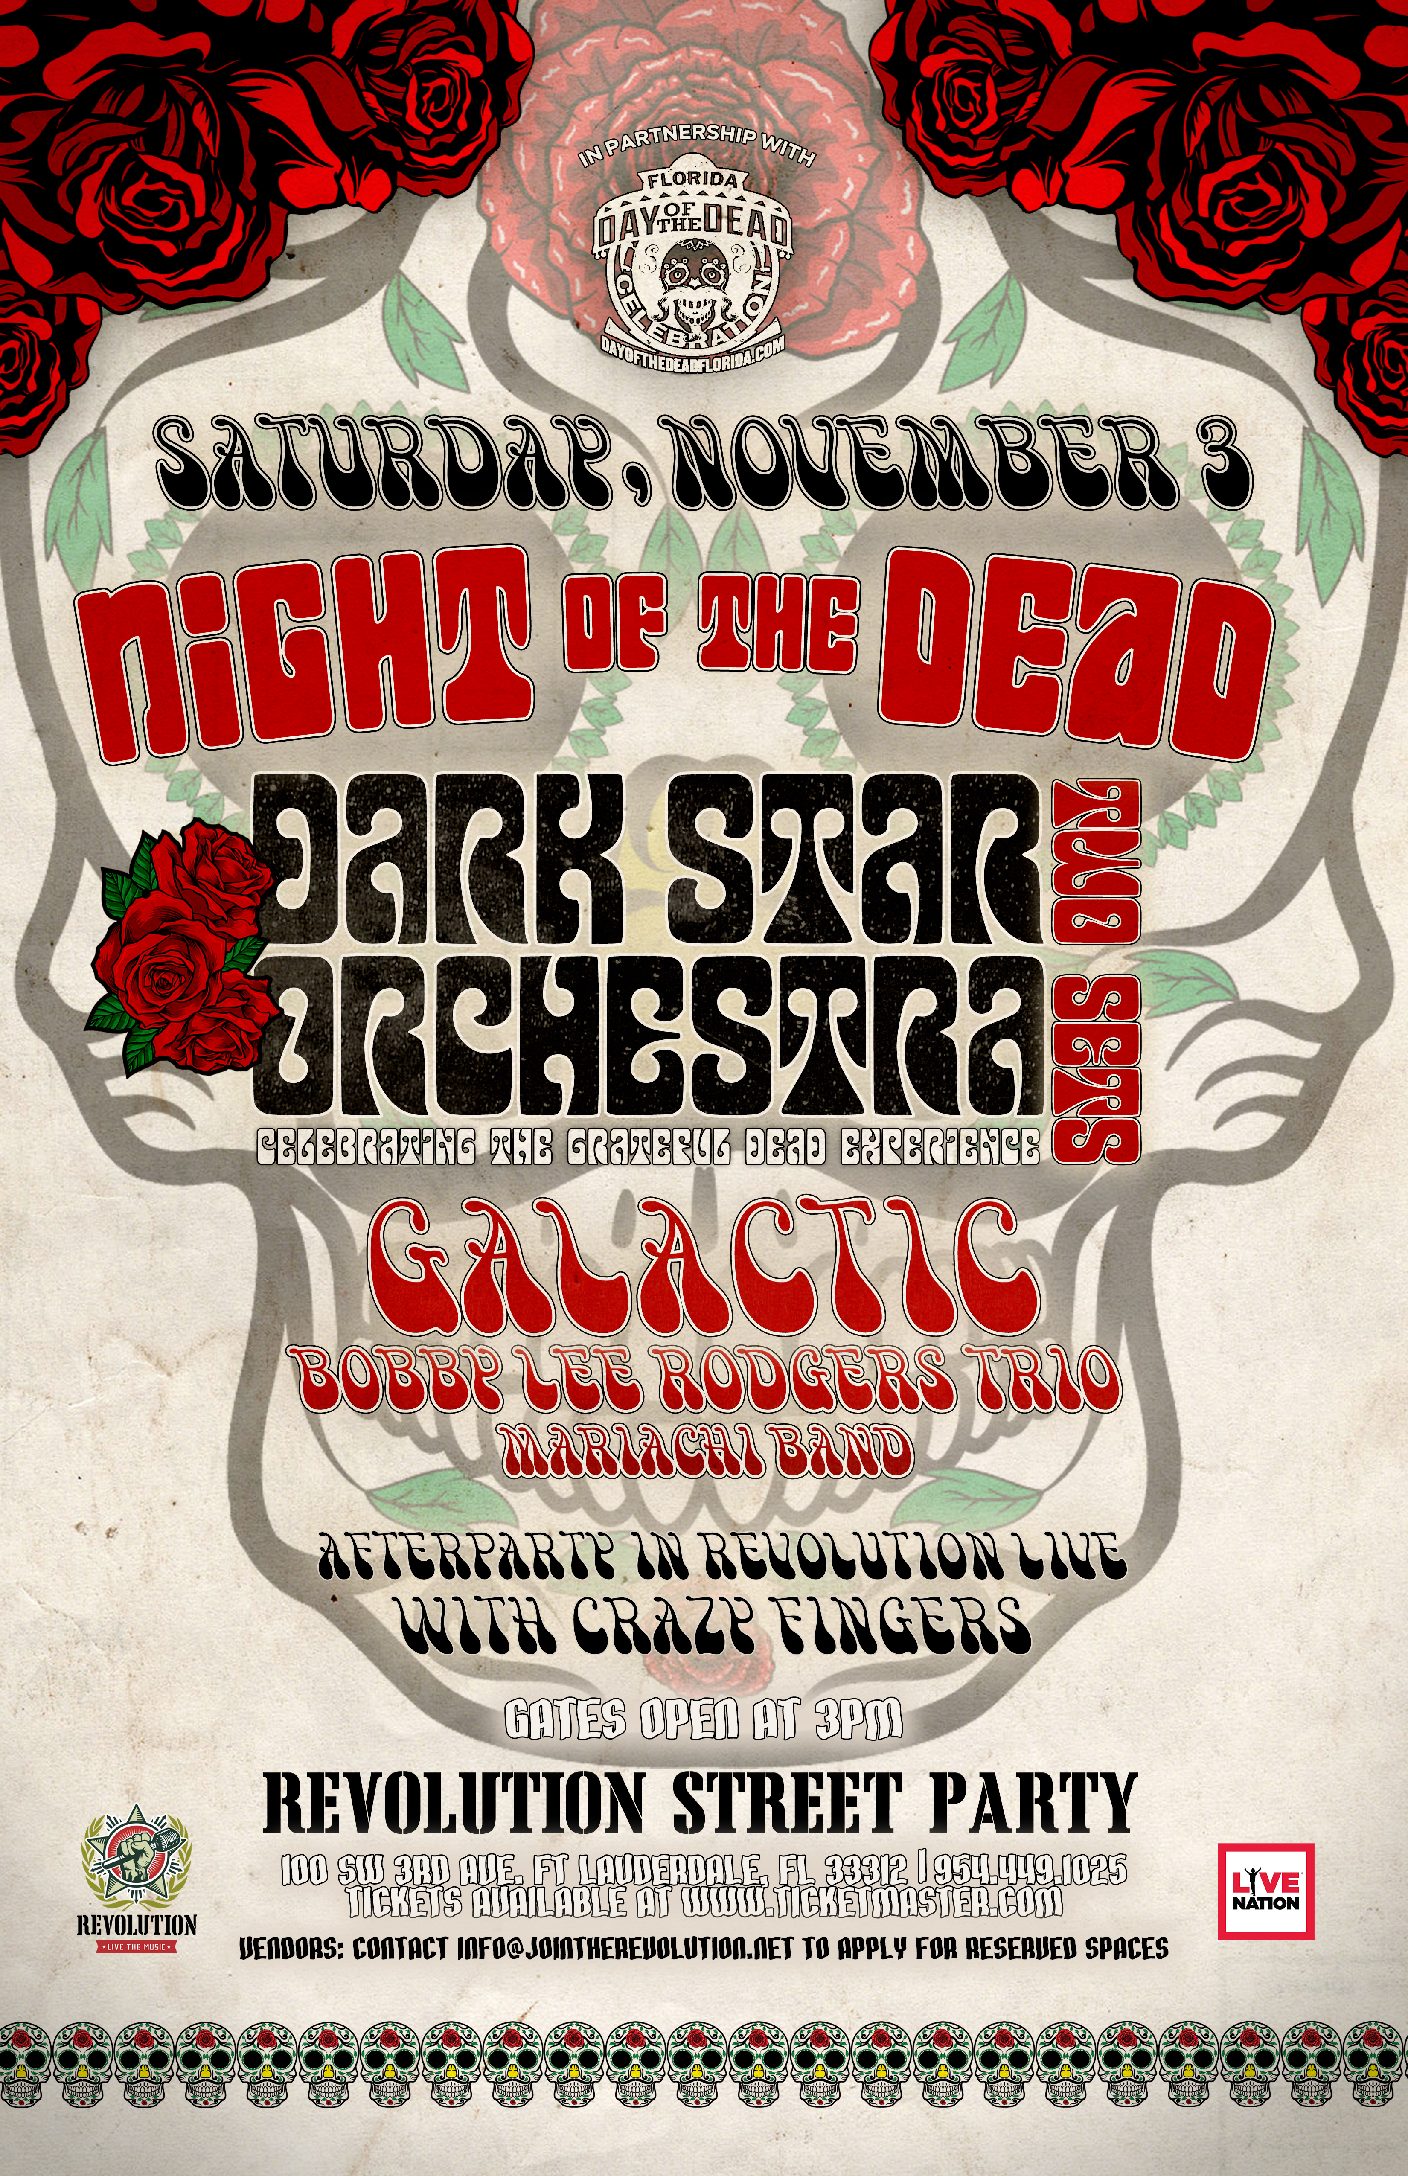 Night of the Dead